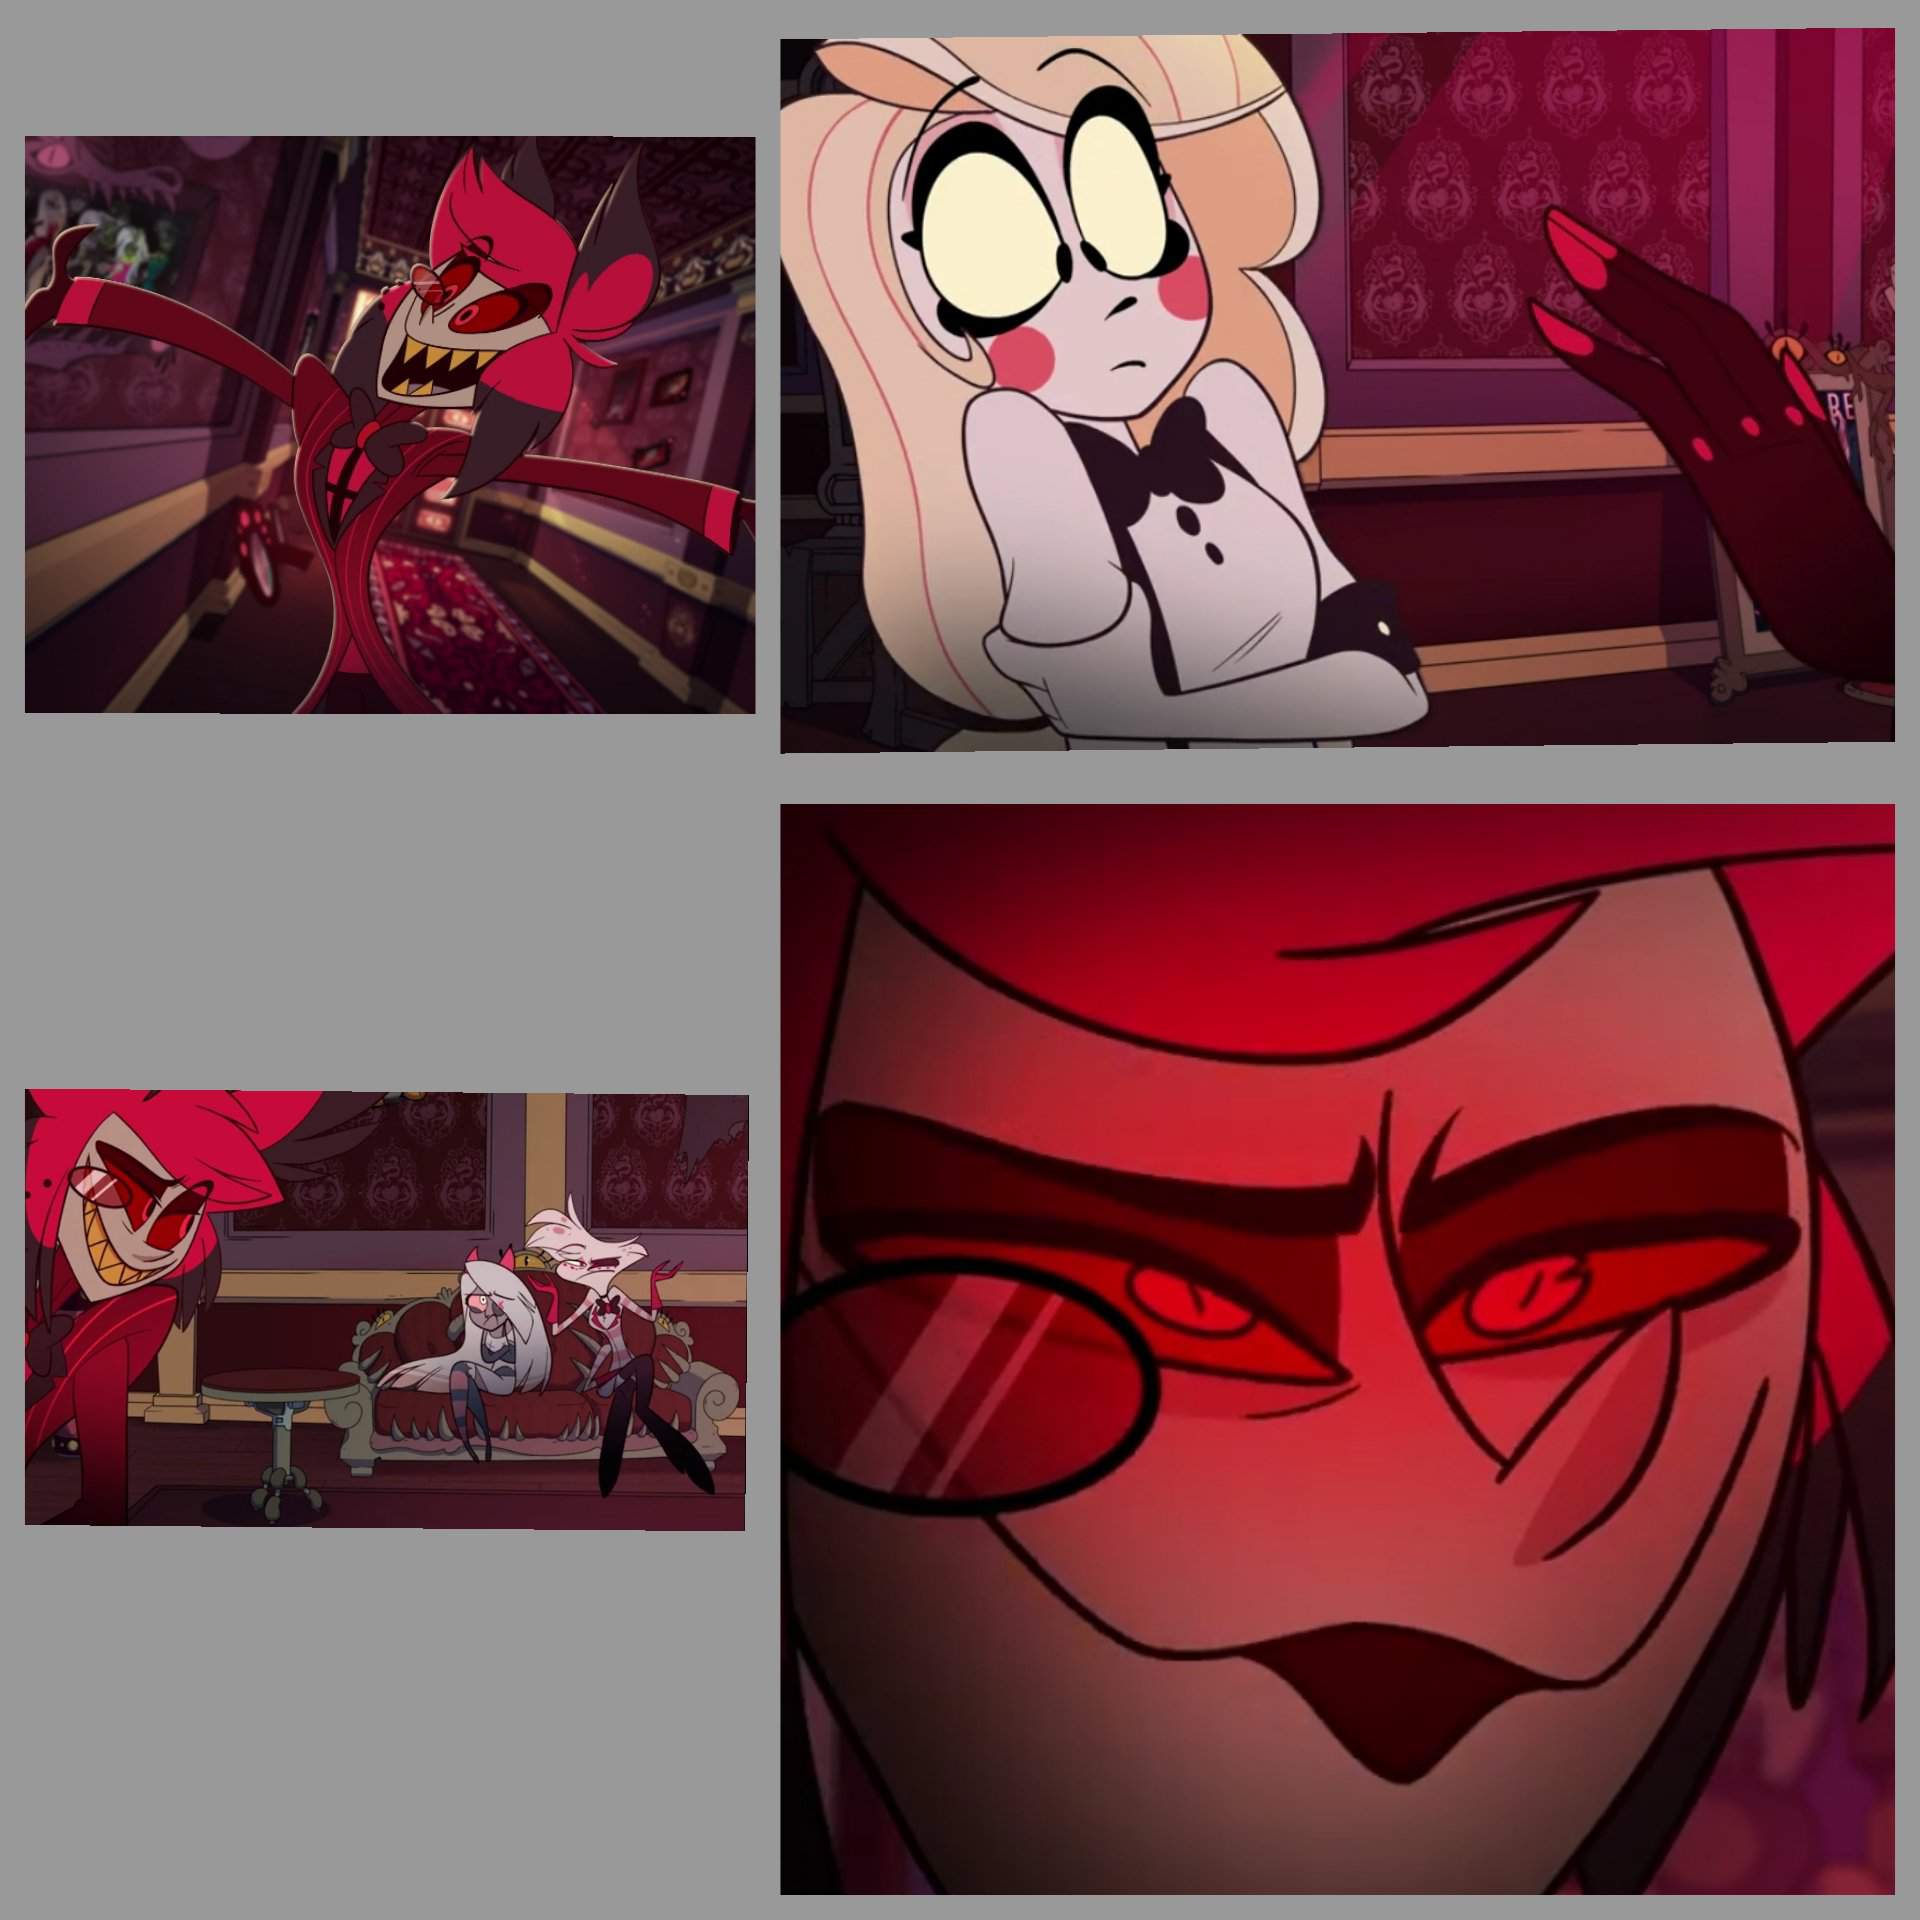 ðŸ˜‰Welcome back everyone to the last part of J.C.'s Hazbin Hotel Review...